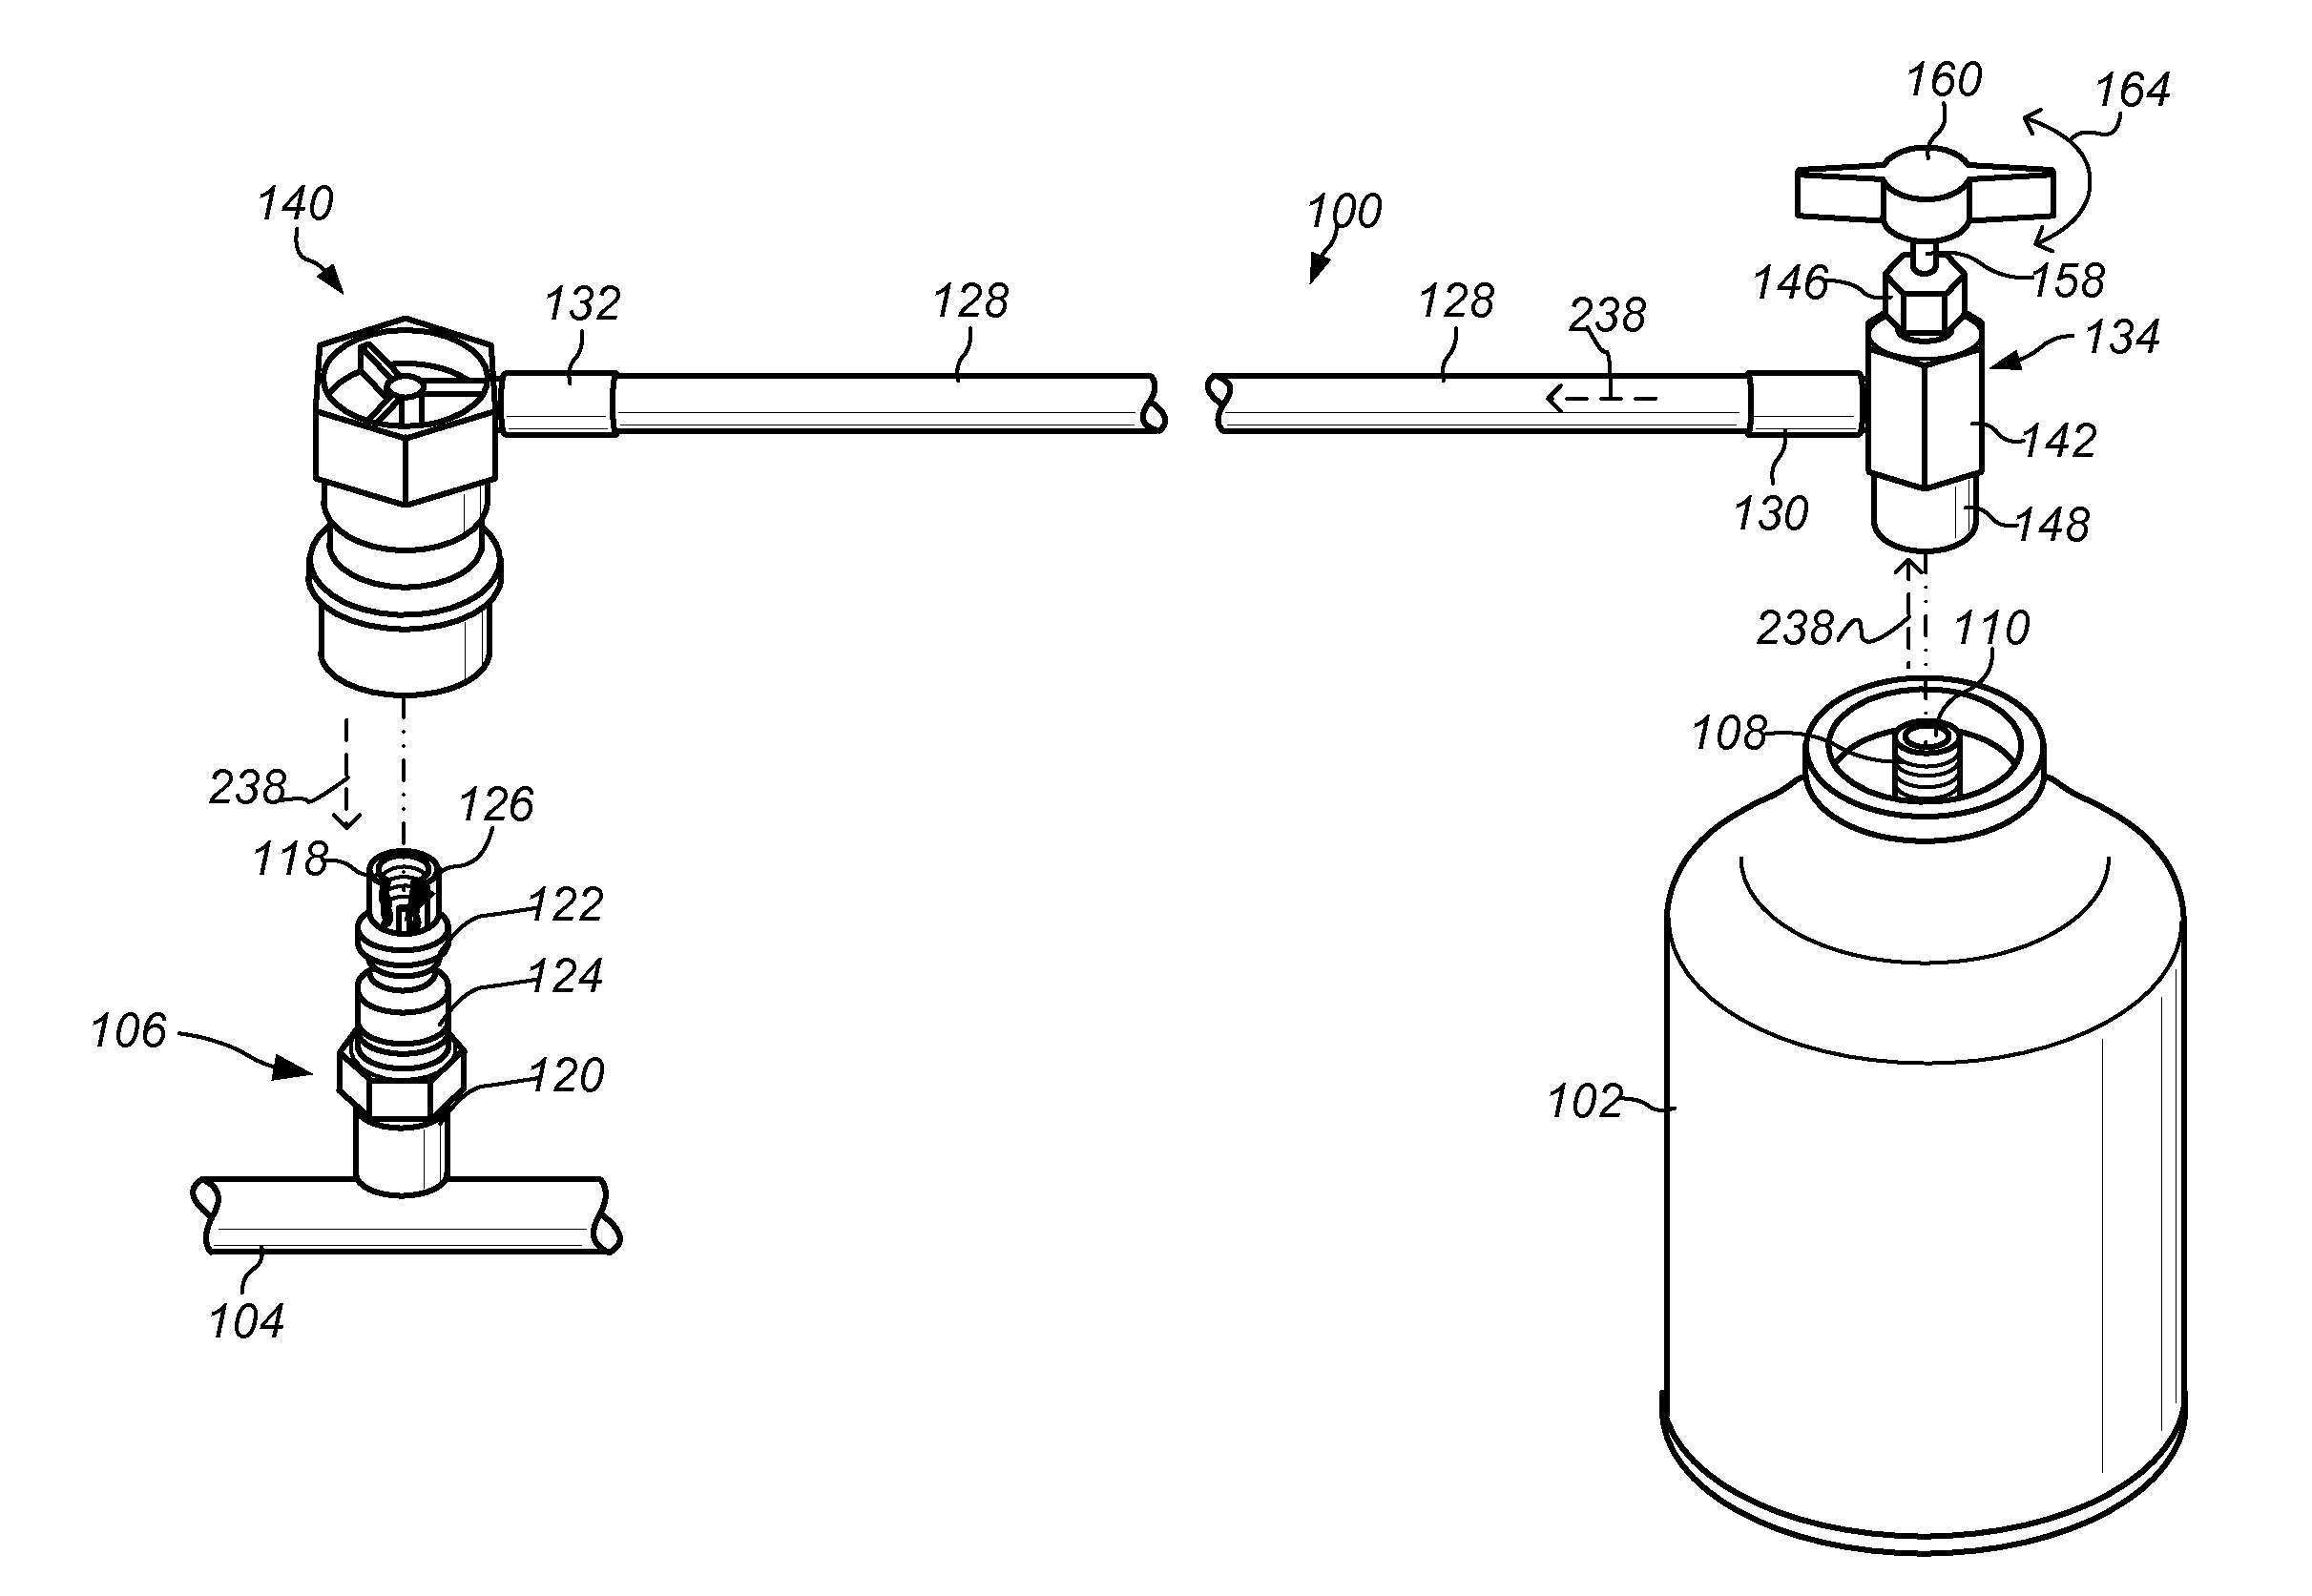 Refrigerant charging assemblies and methods of use